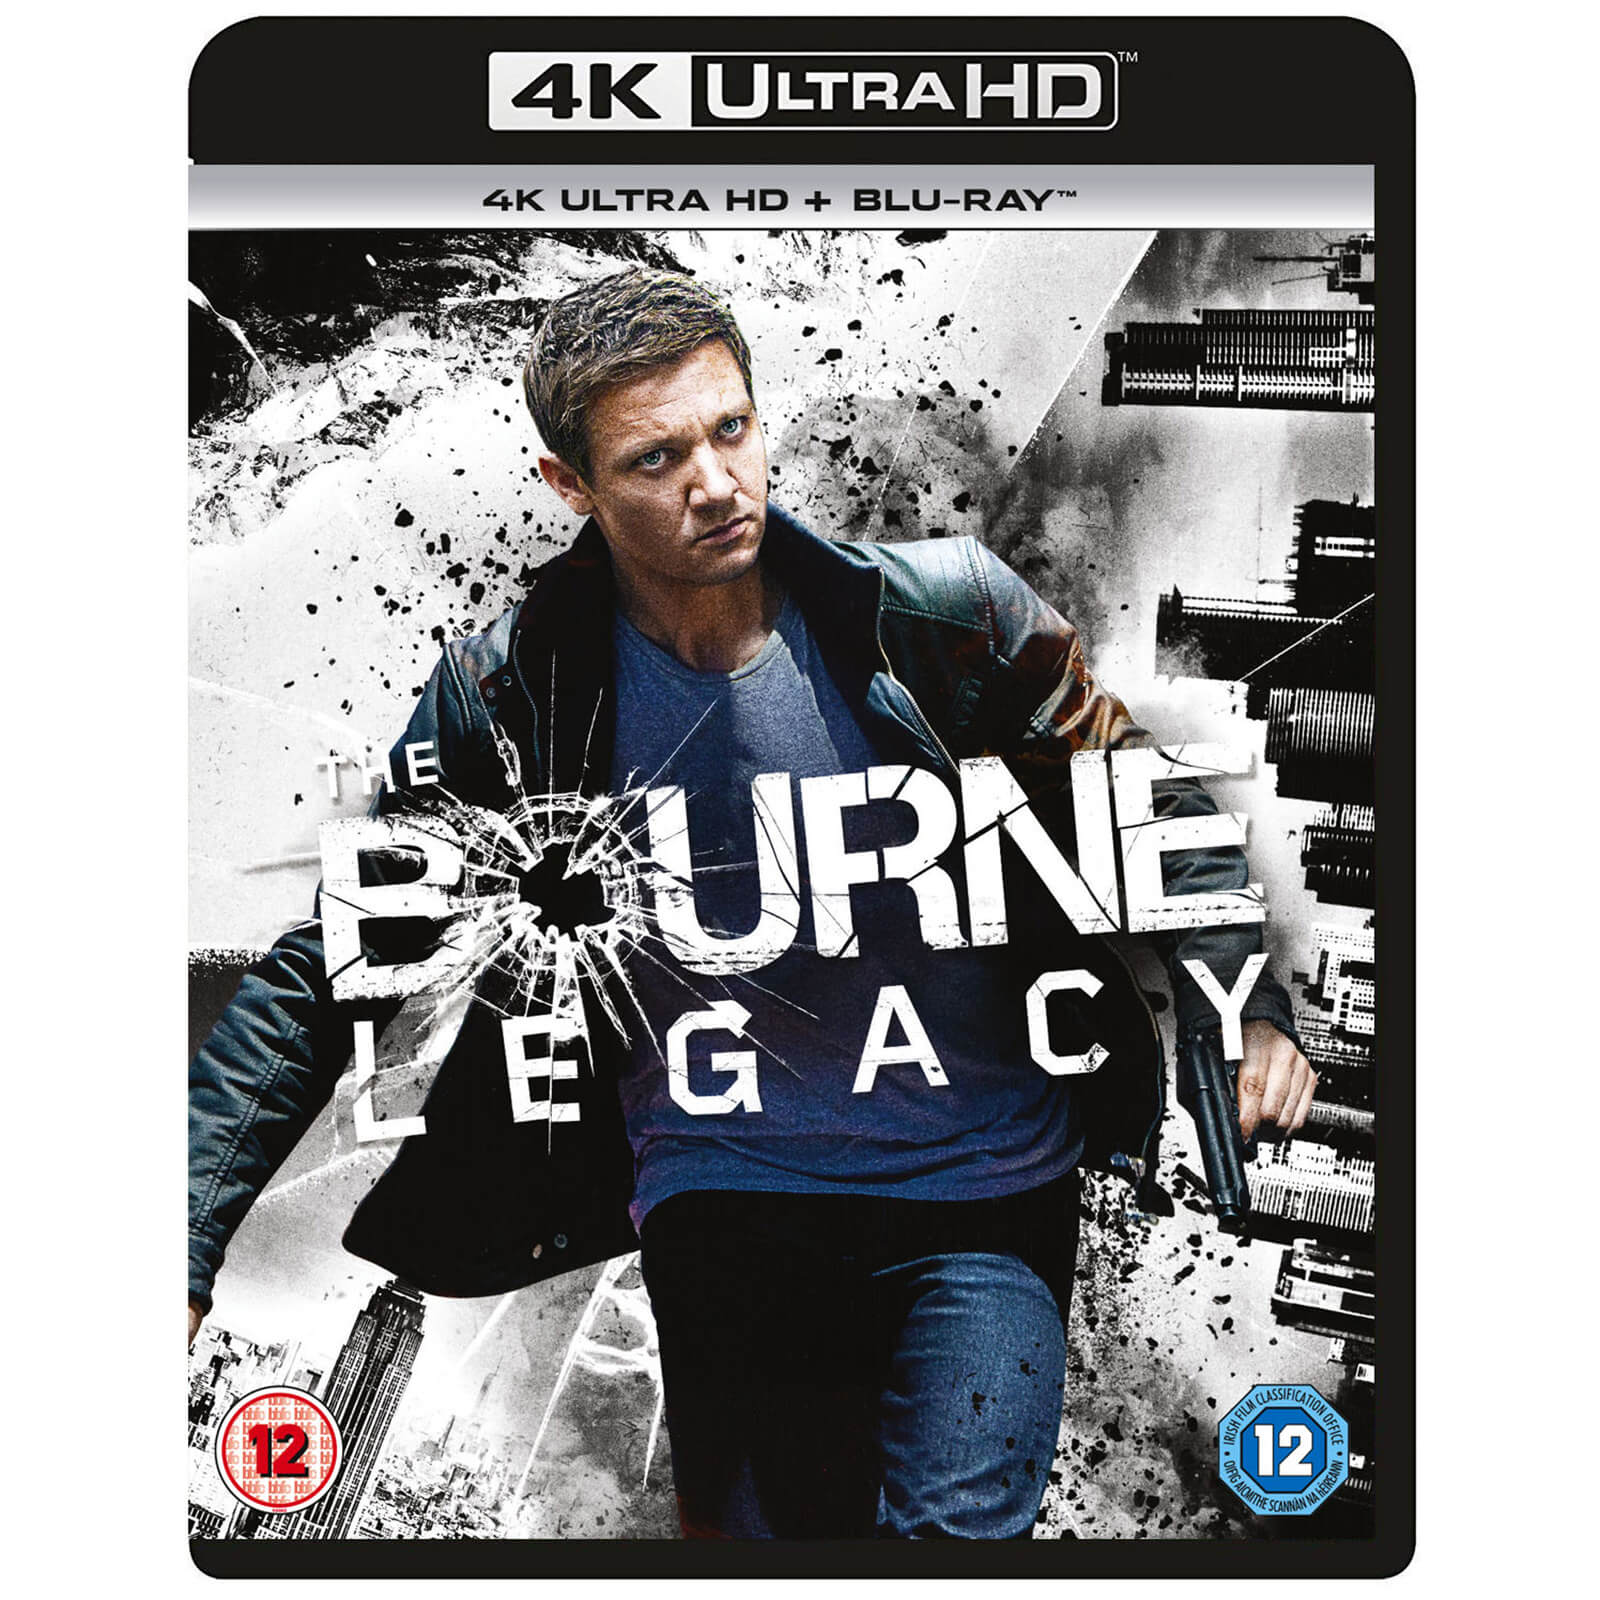 Universal Pictures The bourne legacy - 4k ultra hd